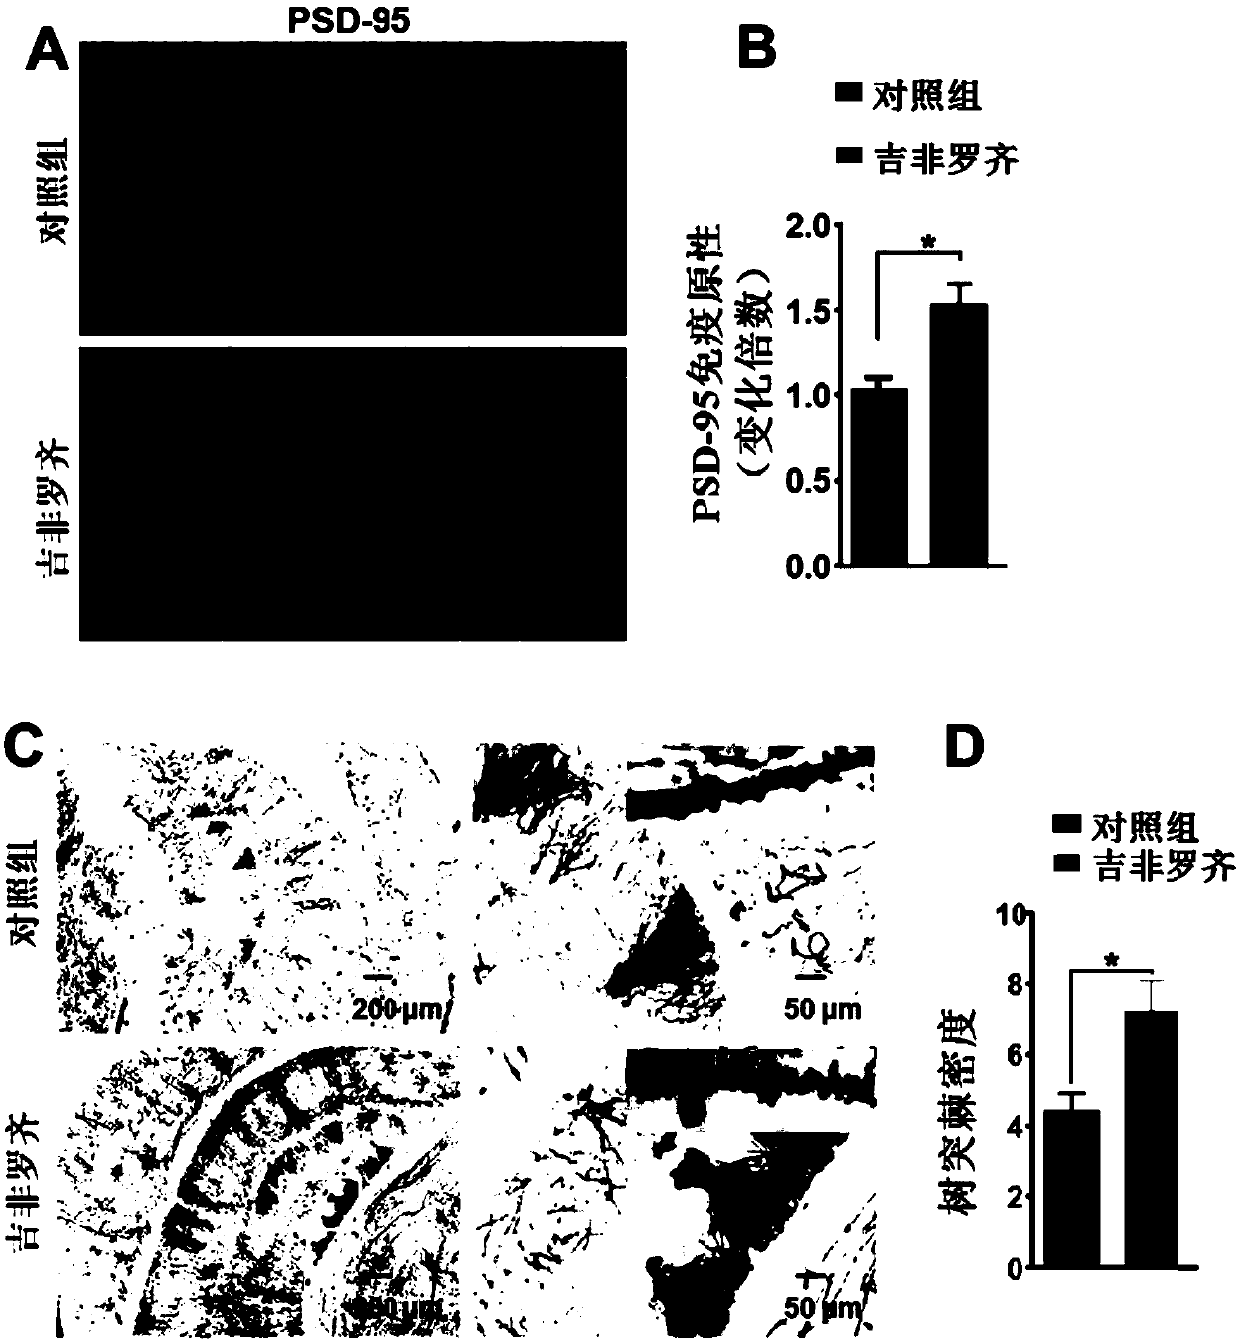 Application of gemfibrozil and derivatives thereof for treating and/or preventing neurodegenerative diseases